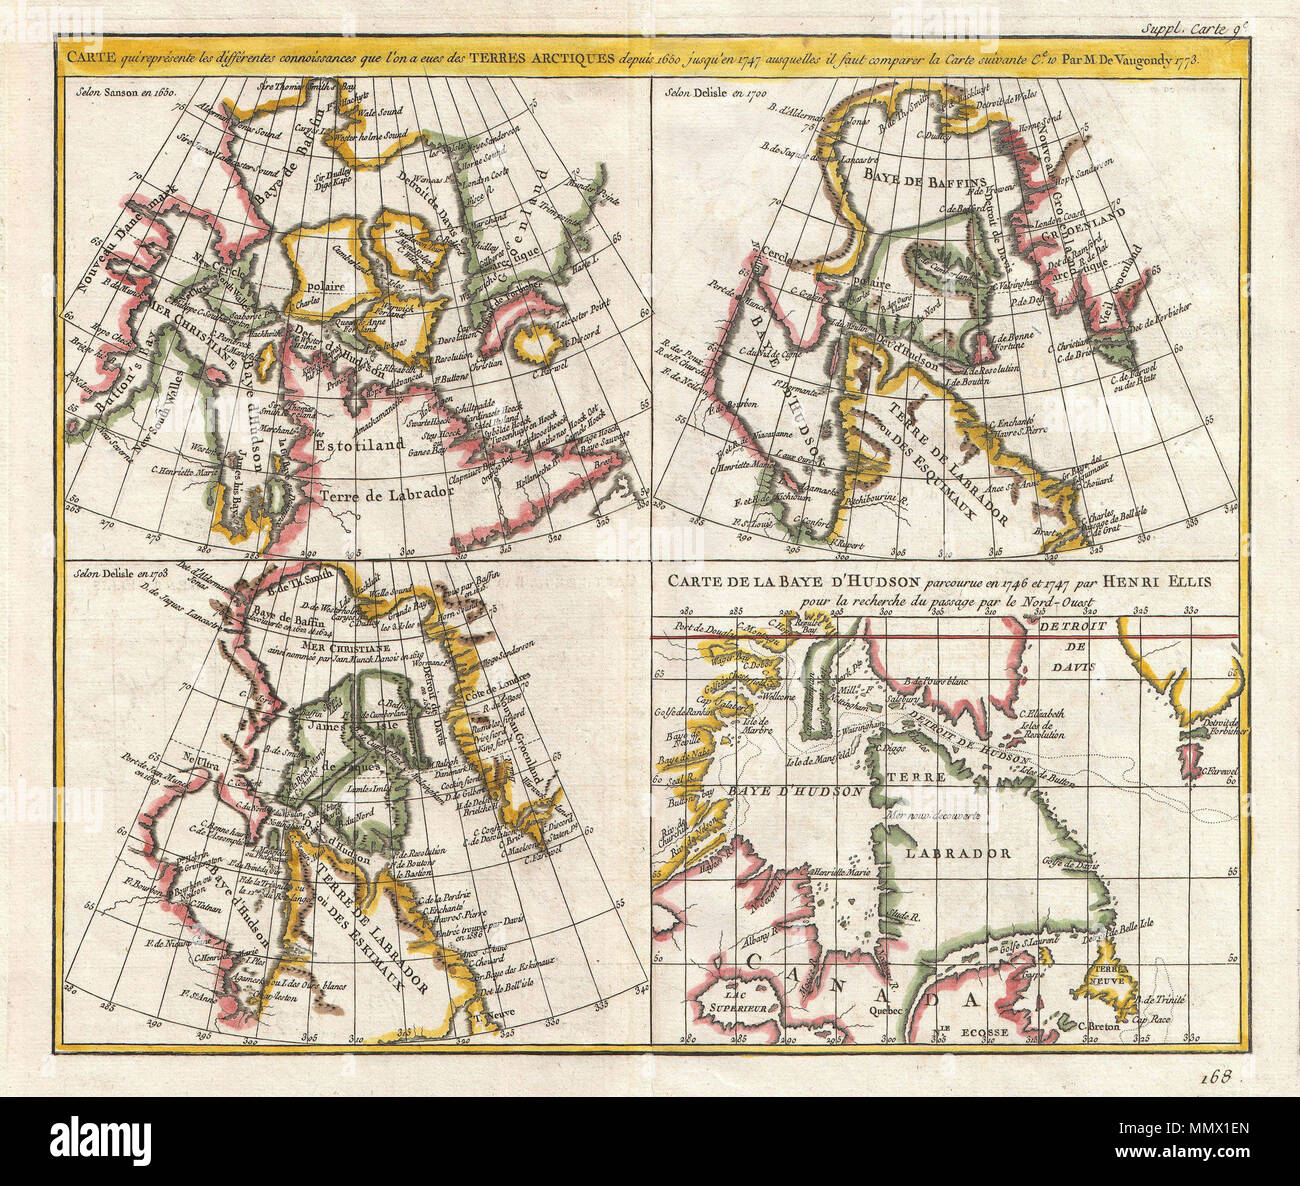 .  English: This is a fascinating combination of four contrasting maps of the same area a single sheet. All four maps cover the northeastern part of America and Greenland, including the Hudson, Button and Baffin Bay regions, the Davis Straits and the Coast Labrador. The upper left map depicts the work of Sanson in 1650, the upper right map the work of De L’Isle in 1700, the lower left map the world of De L’Isle in 1703 and the lower right map the work of Henri Ellis in 1747. This four map chart is one of the earliest examples of comparative cartography. Prepared by Vaugondy as plate no. 9 for  Stock Photo